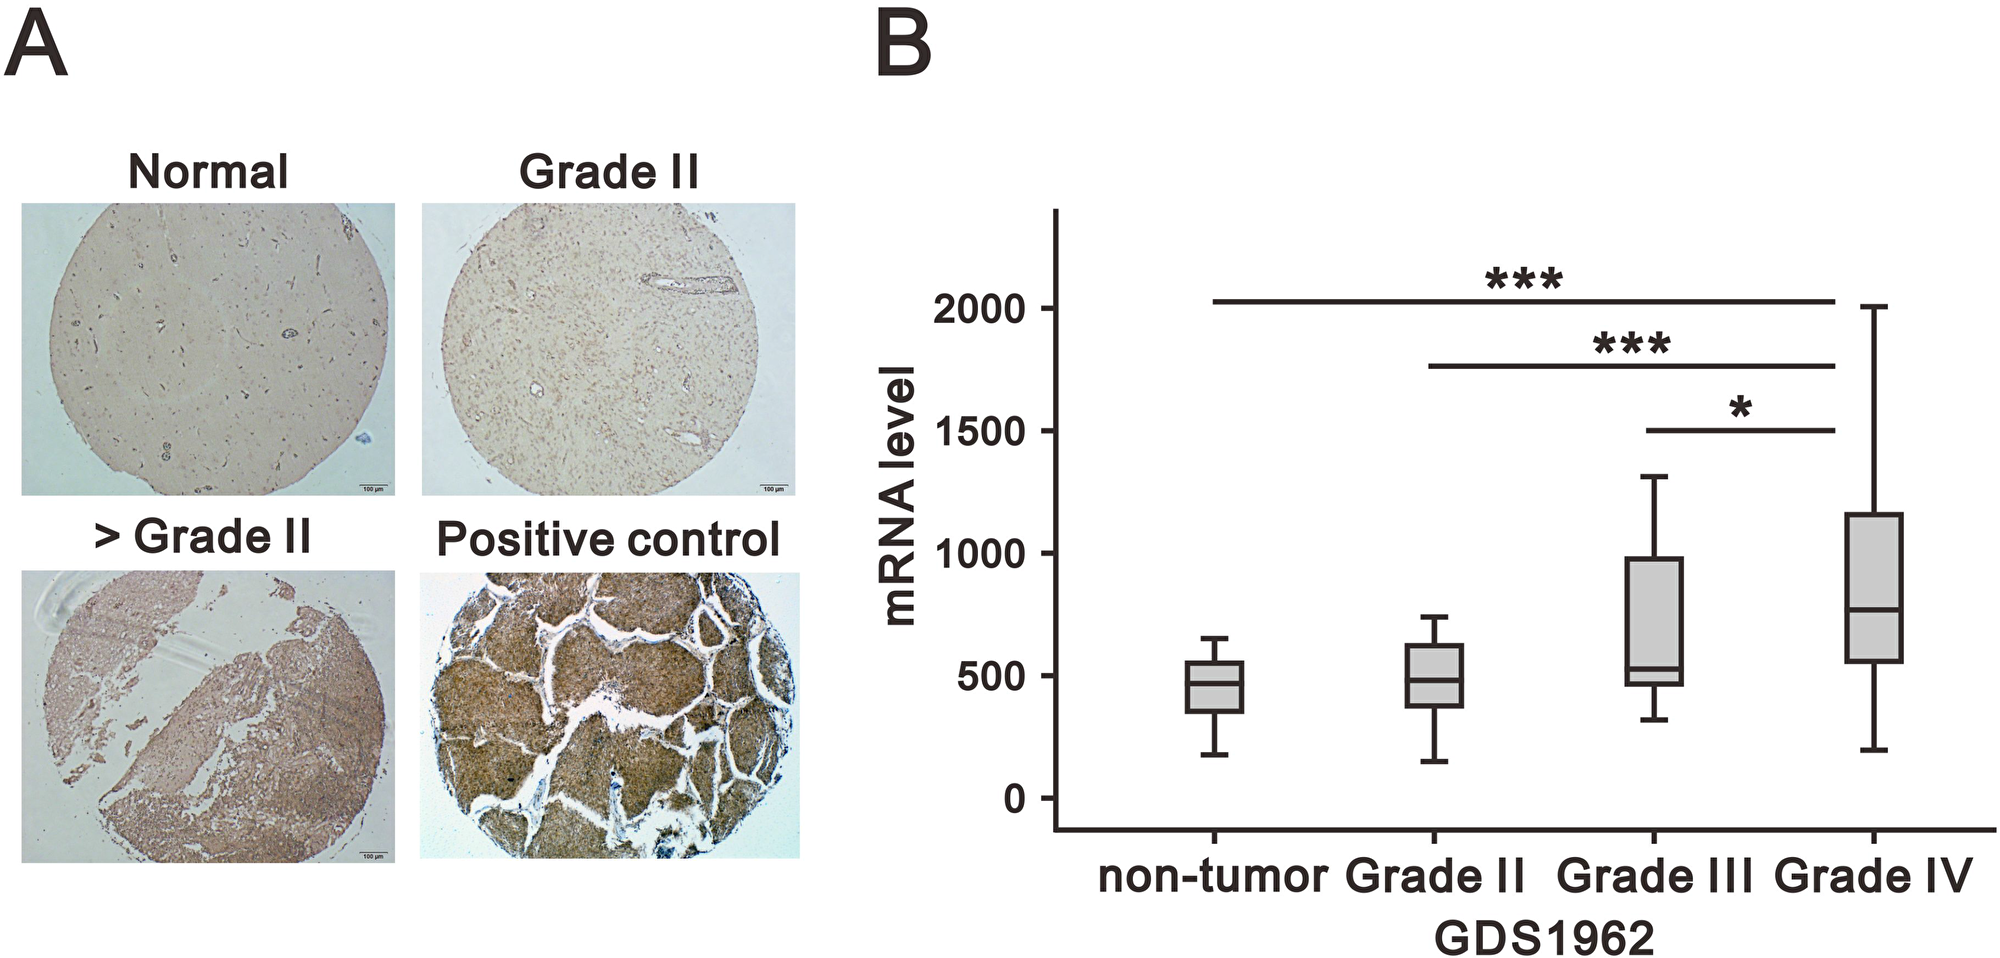 Association of CD164 expression in glioma with clinicopathological parameters.